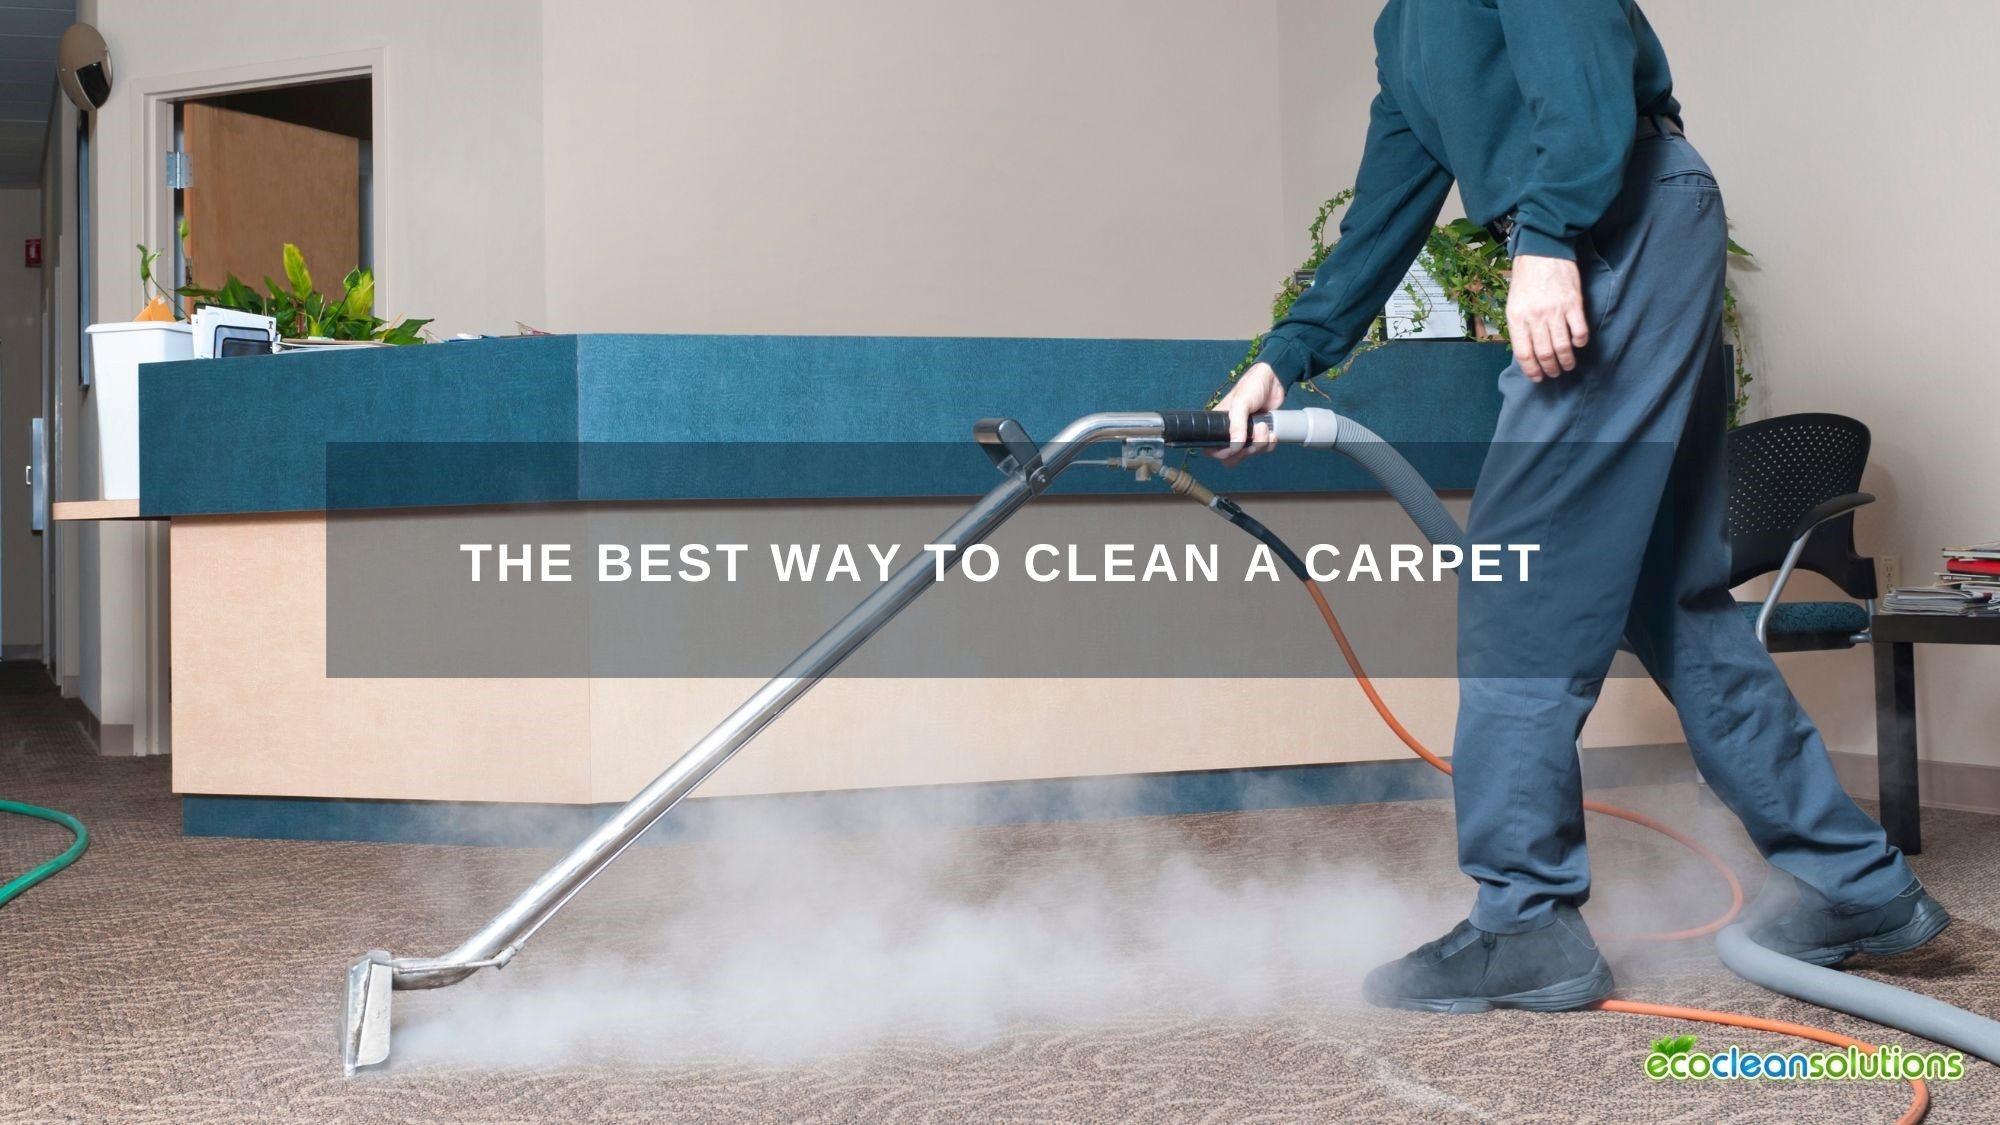 The Best Way to Clean a Carpet